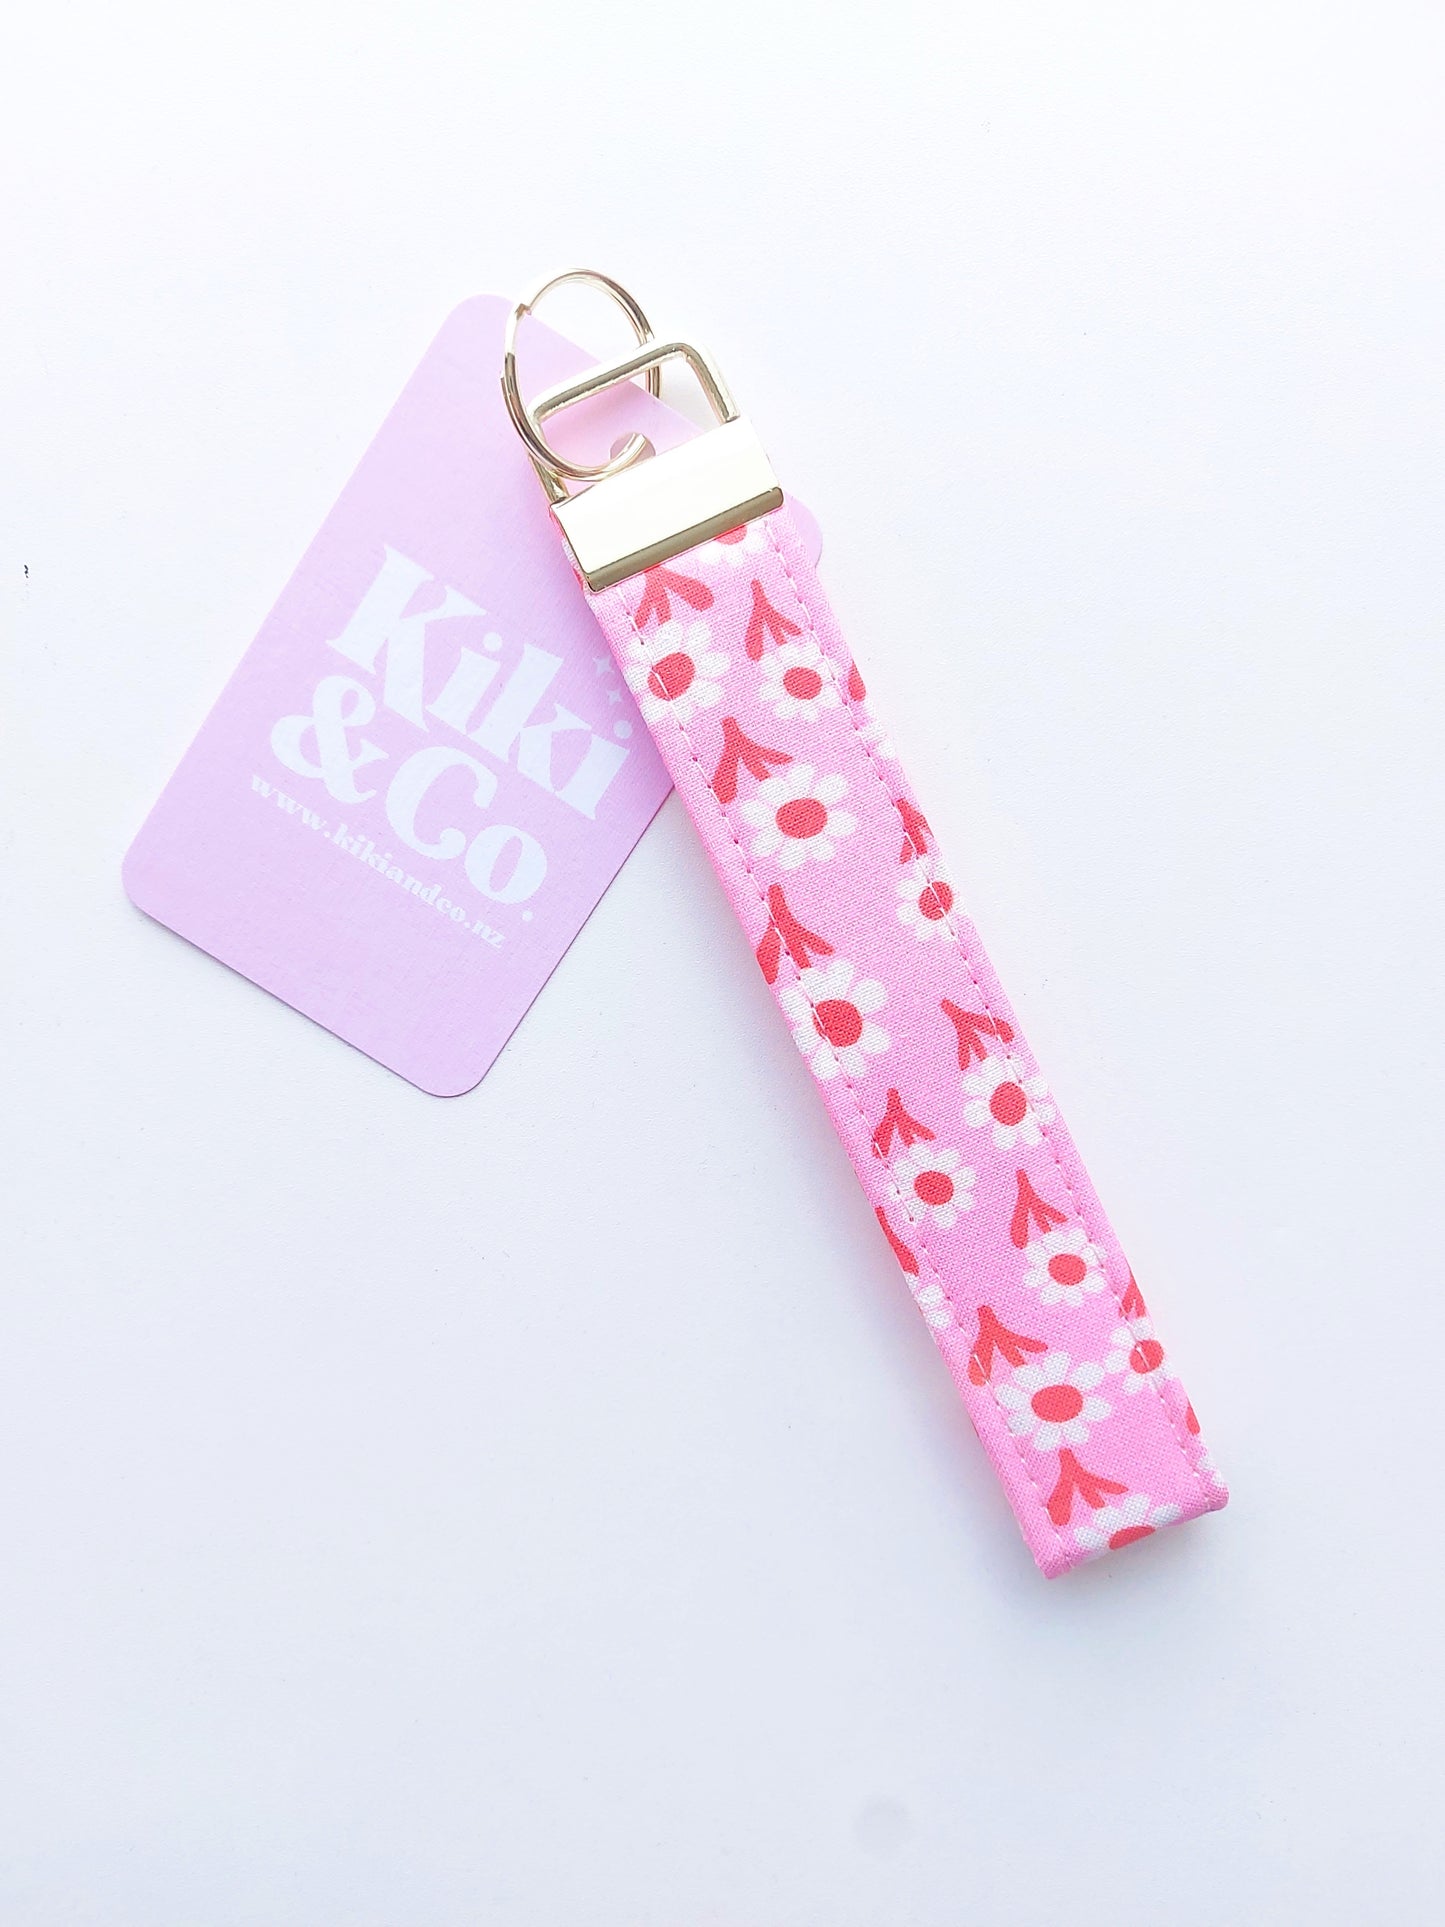 NEW Keychain - Red & Pink Daisy Chain